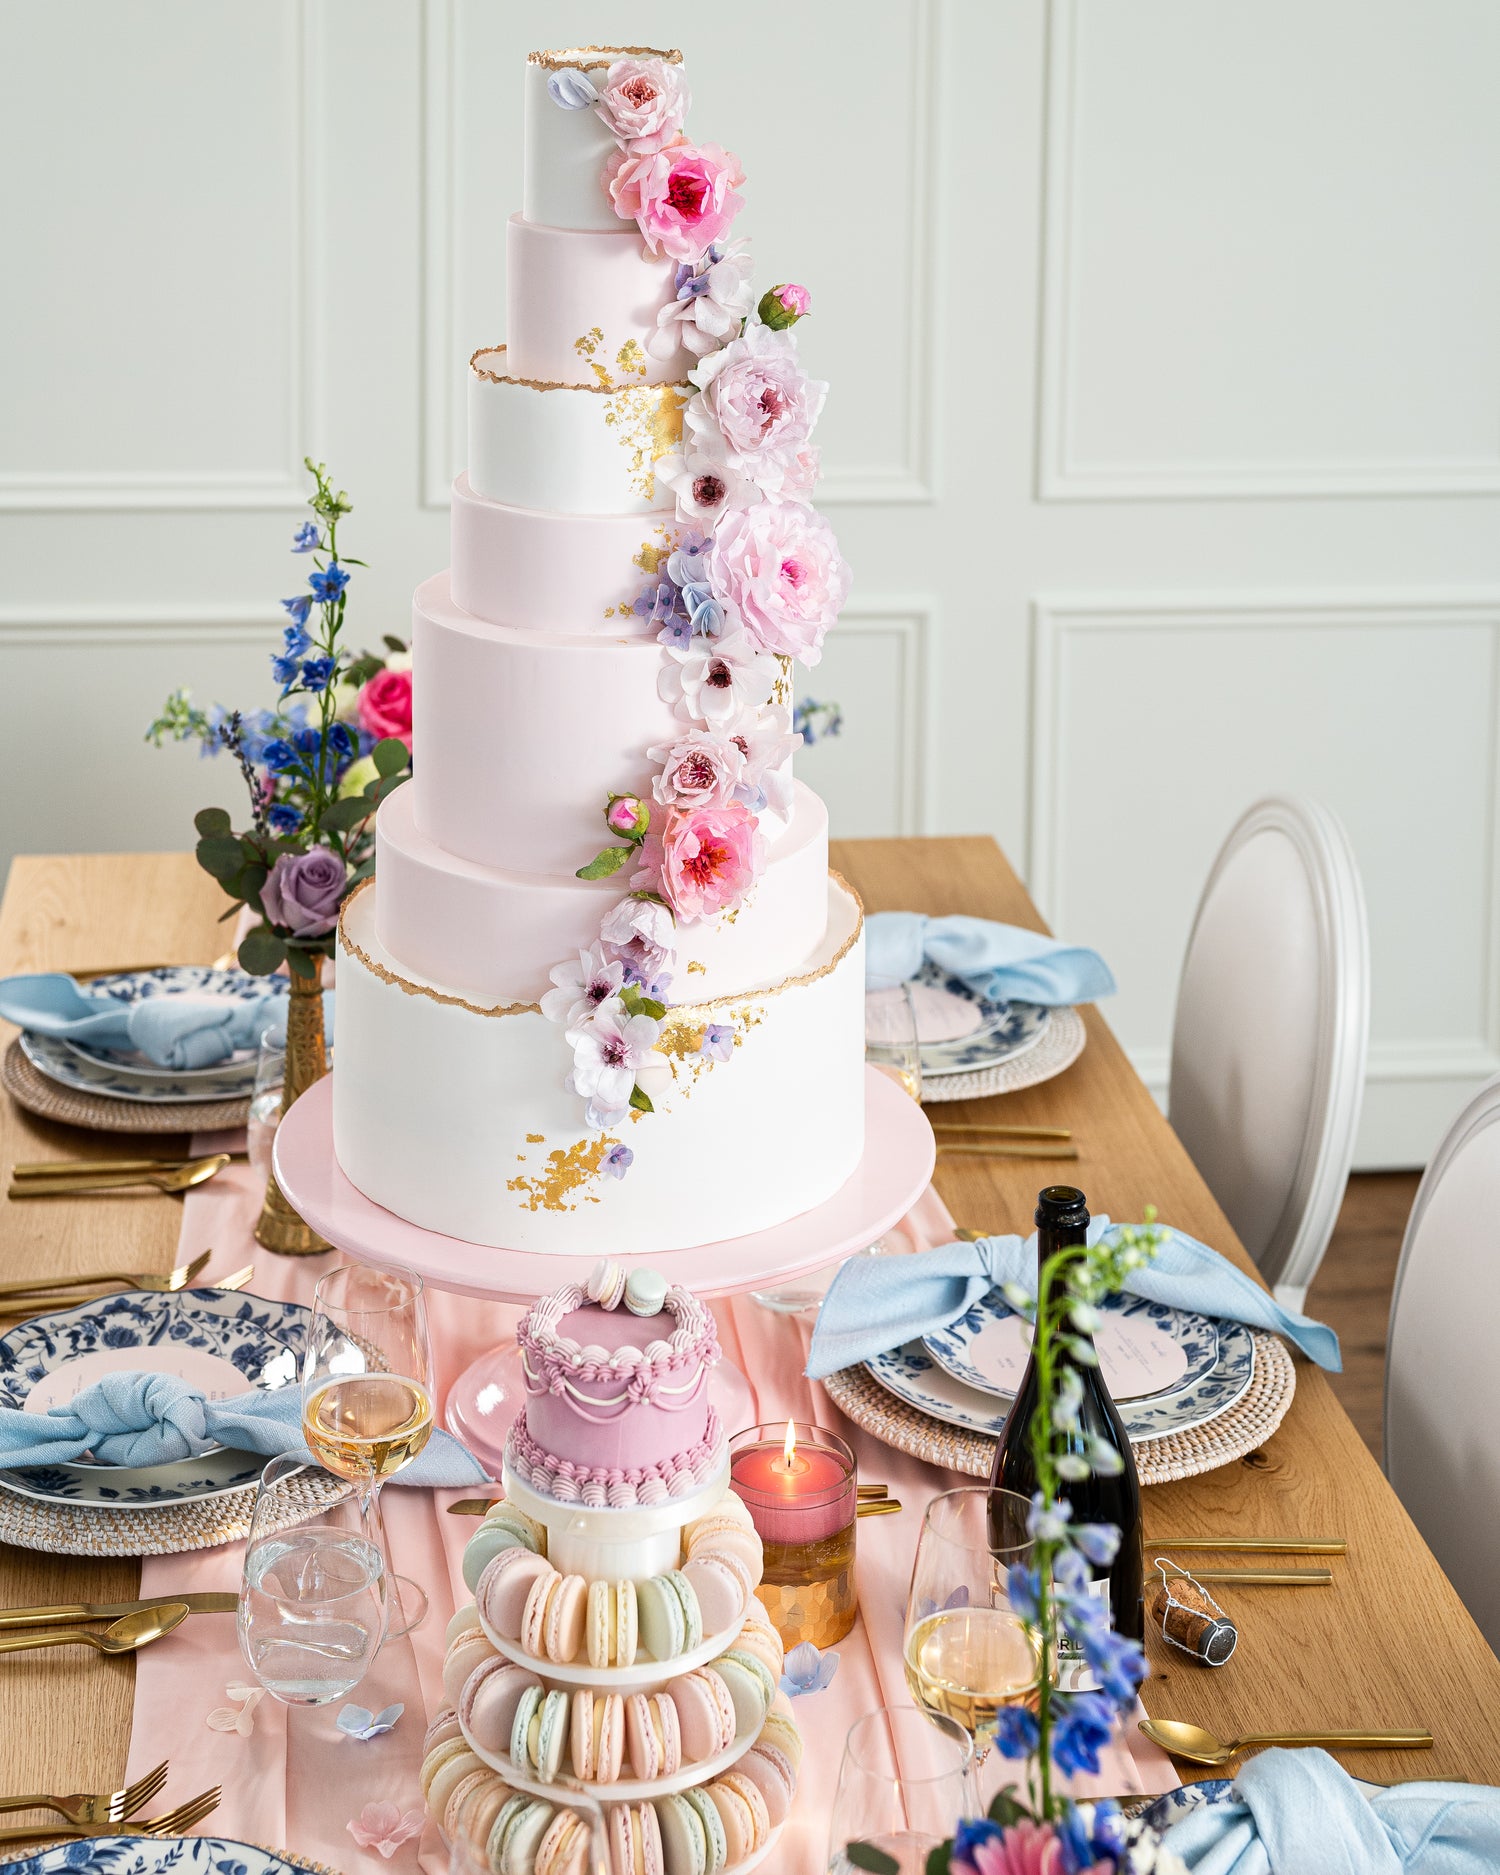 Tall wedding cake in pink lavender and gold with macarons and sweet table desserts